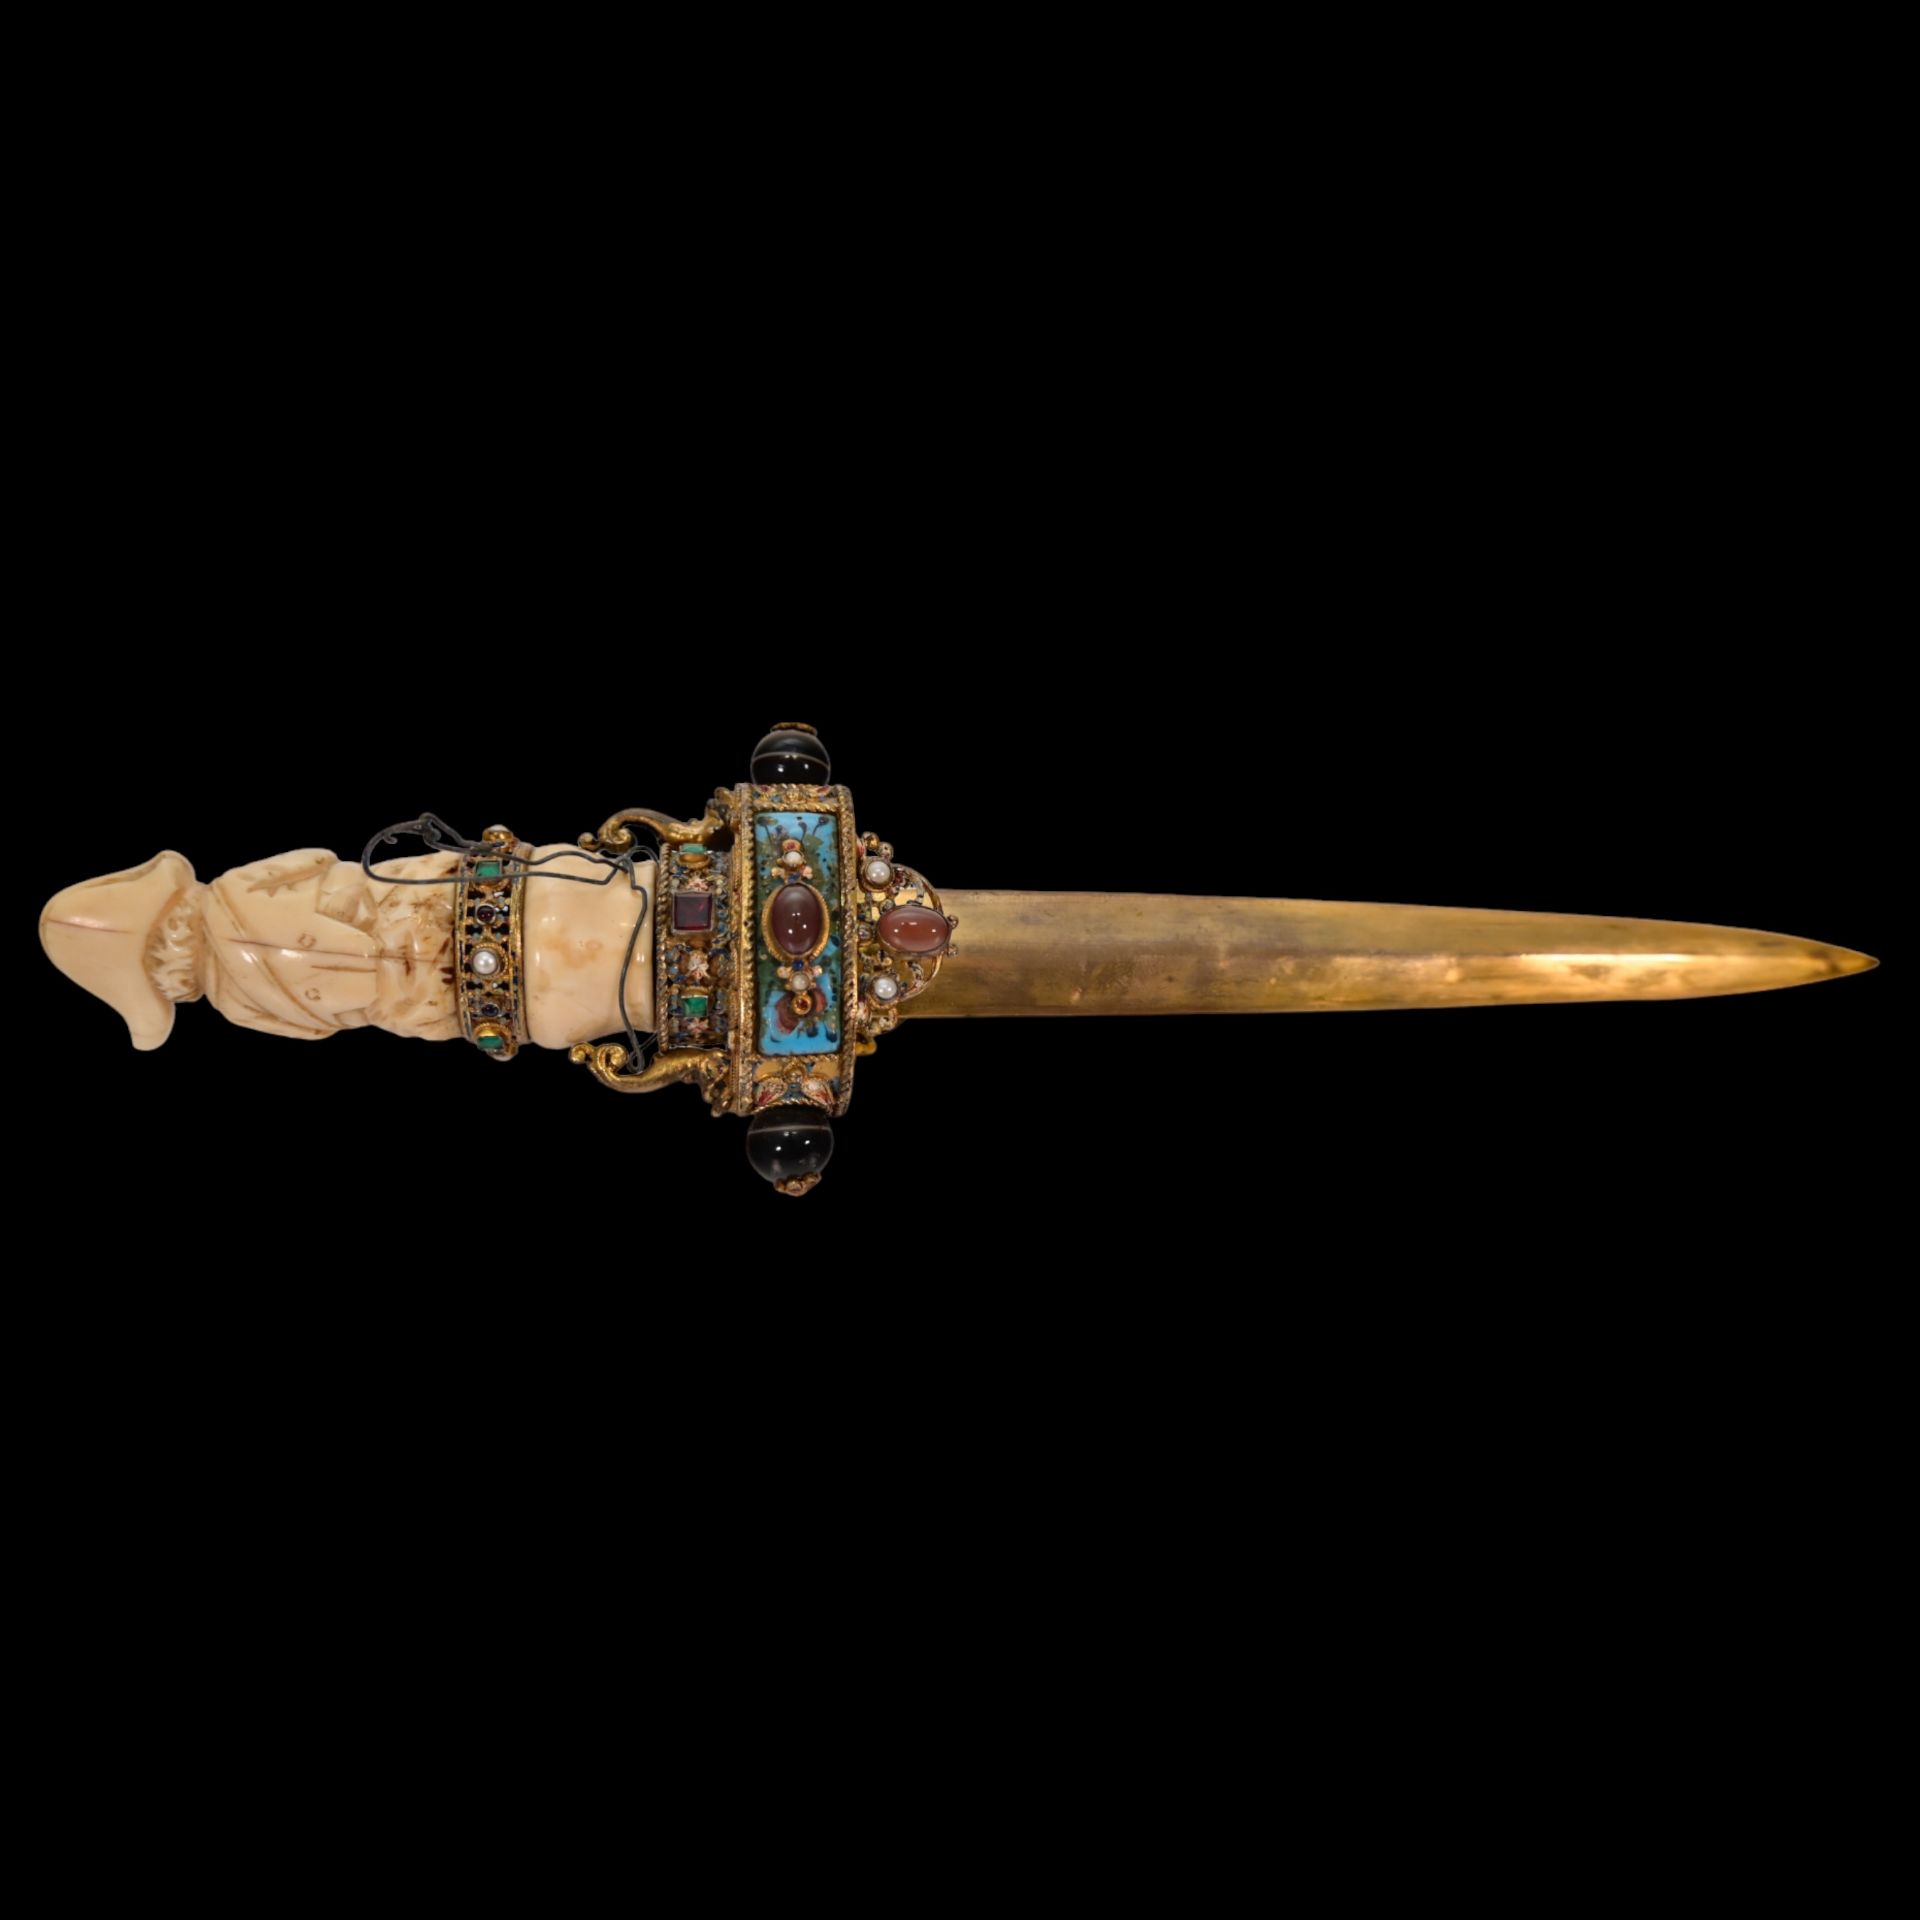 A unique Austrian dagger with a carved bone hilt decorated with gold, precious stones and enamel. - Image 17 of 19